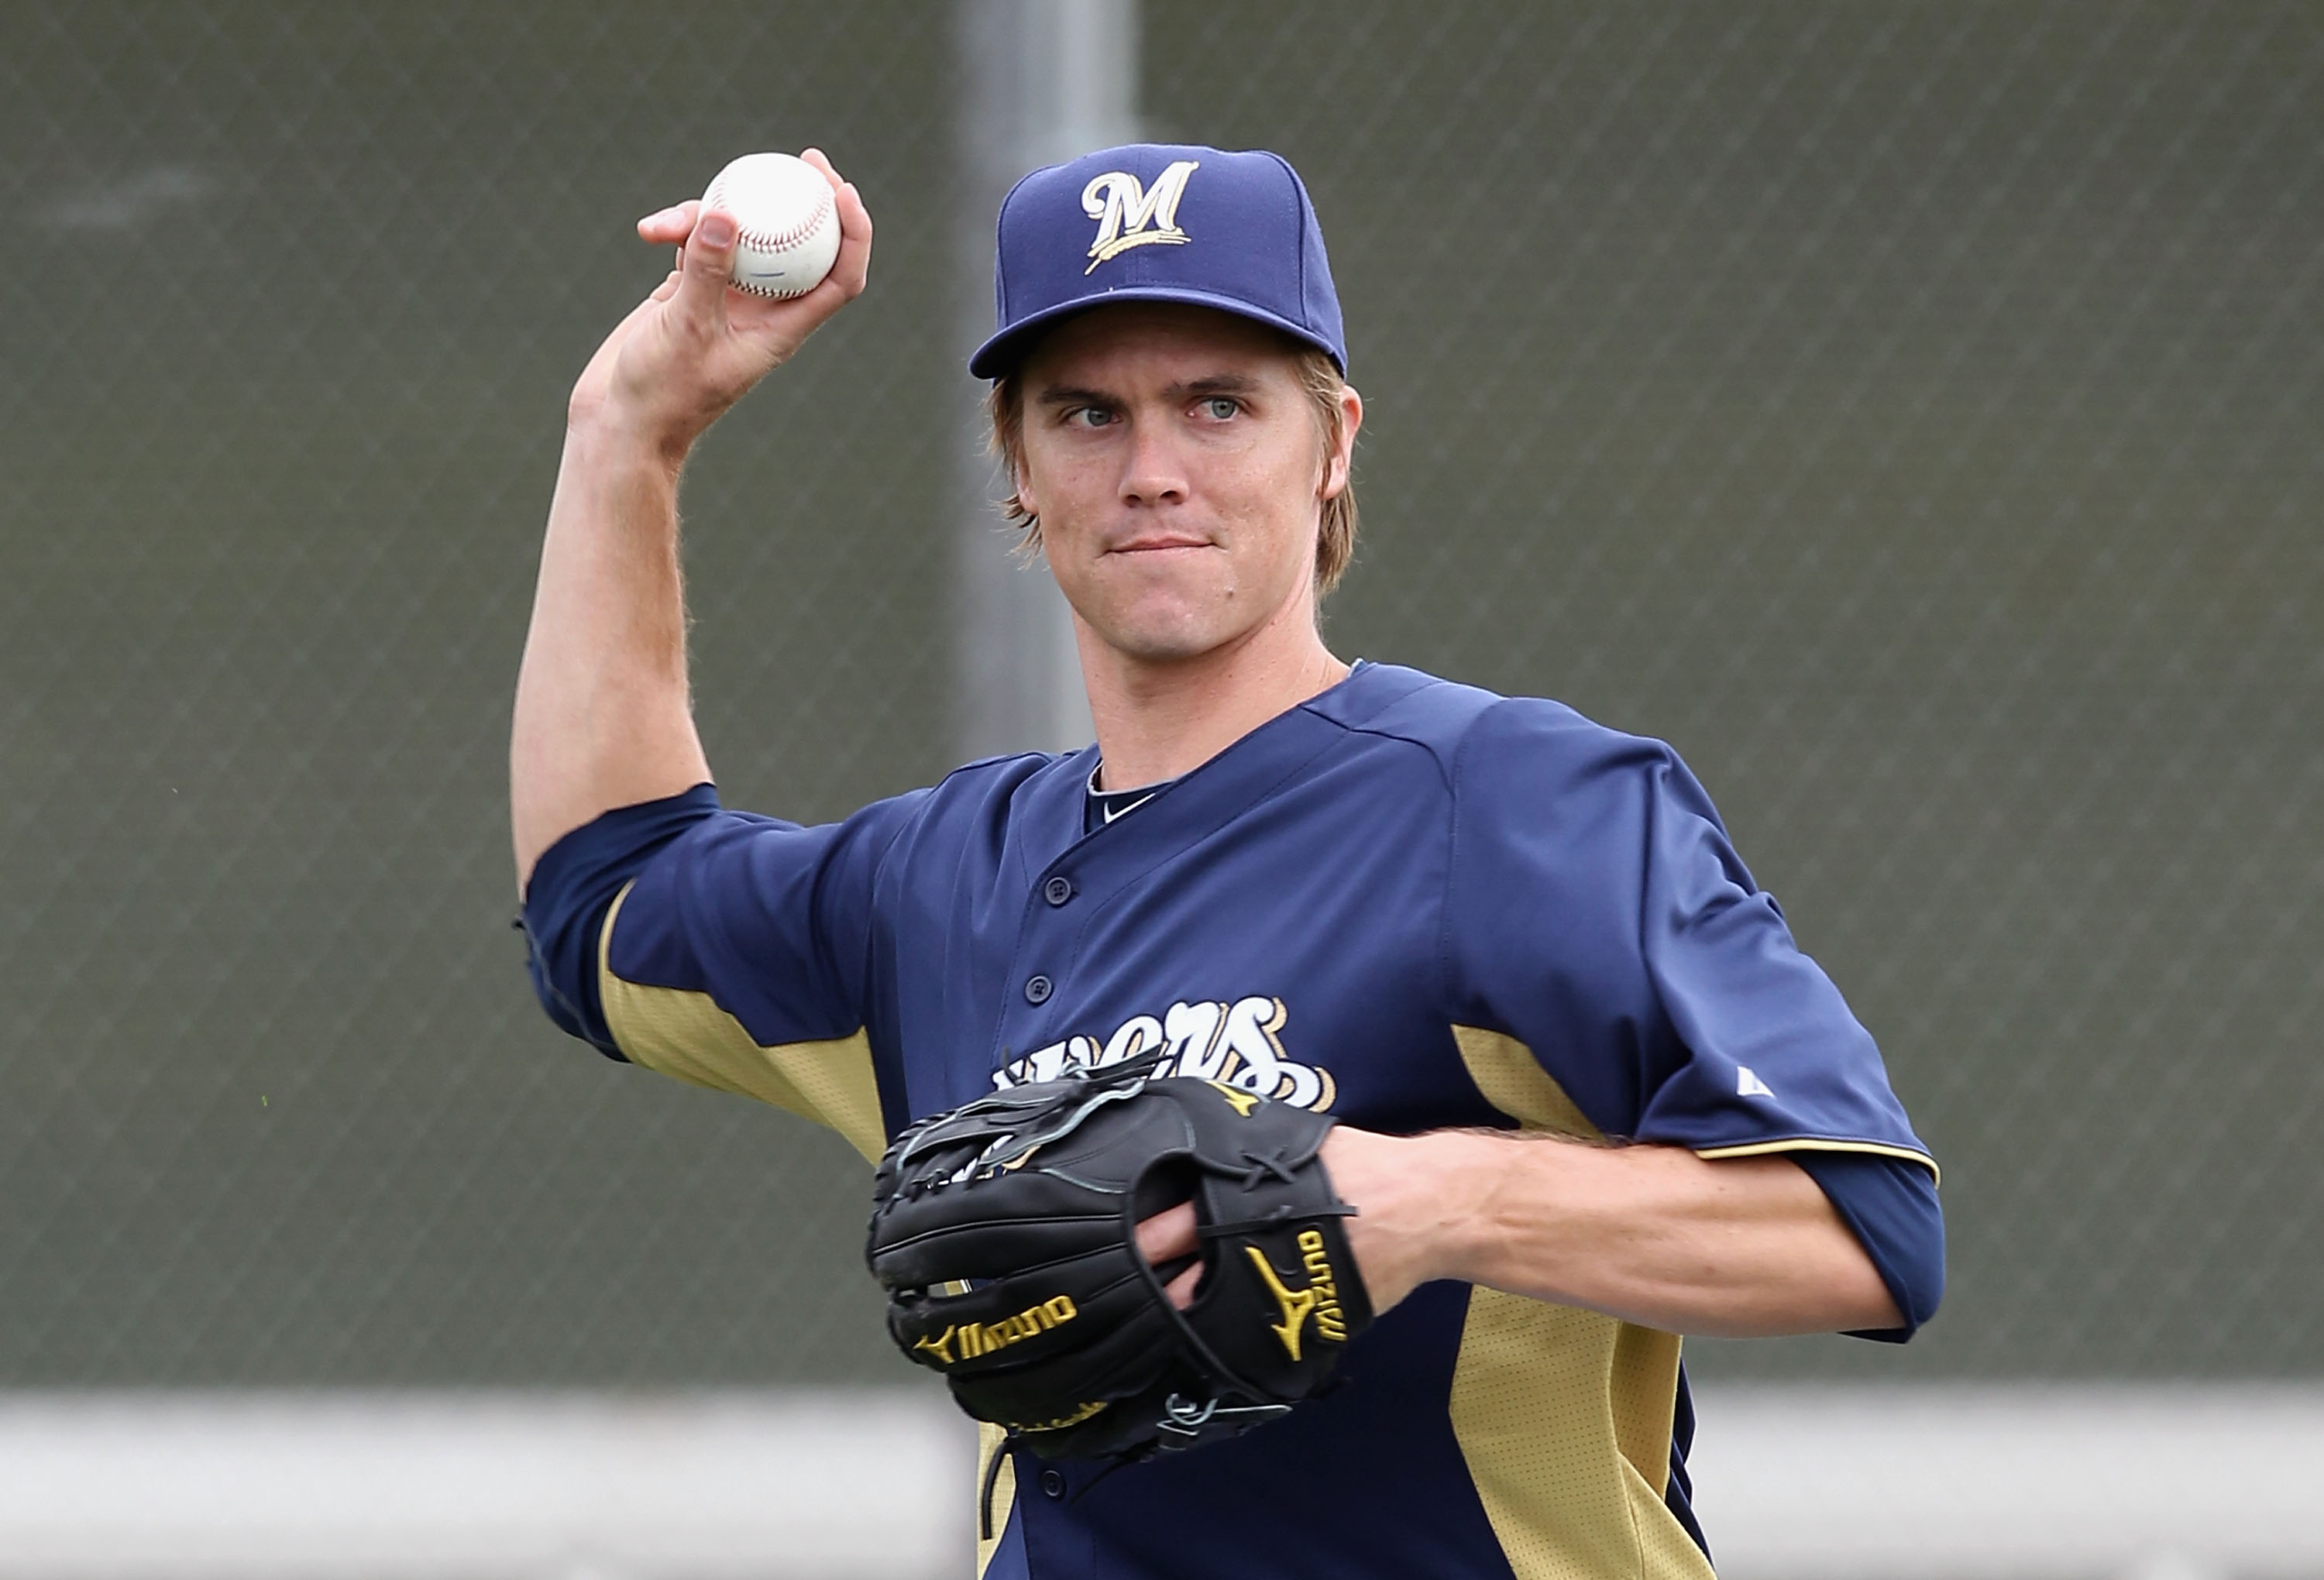 Brewers will rely on Greinke as top starter